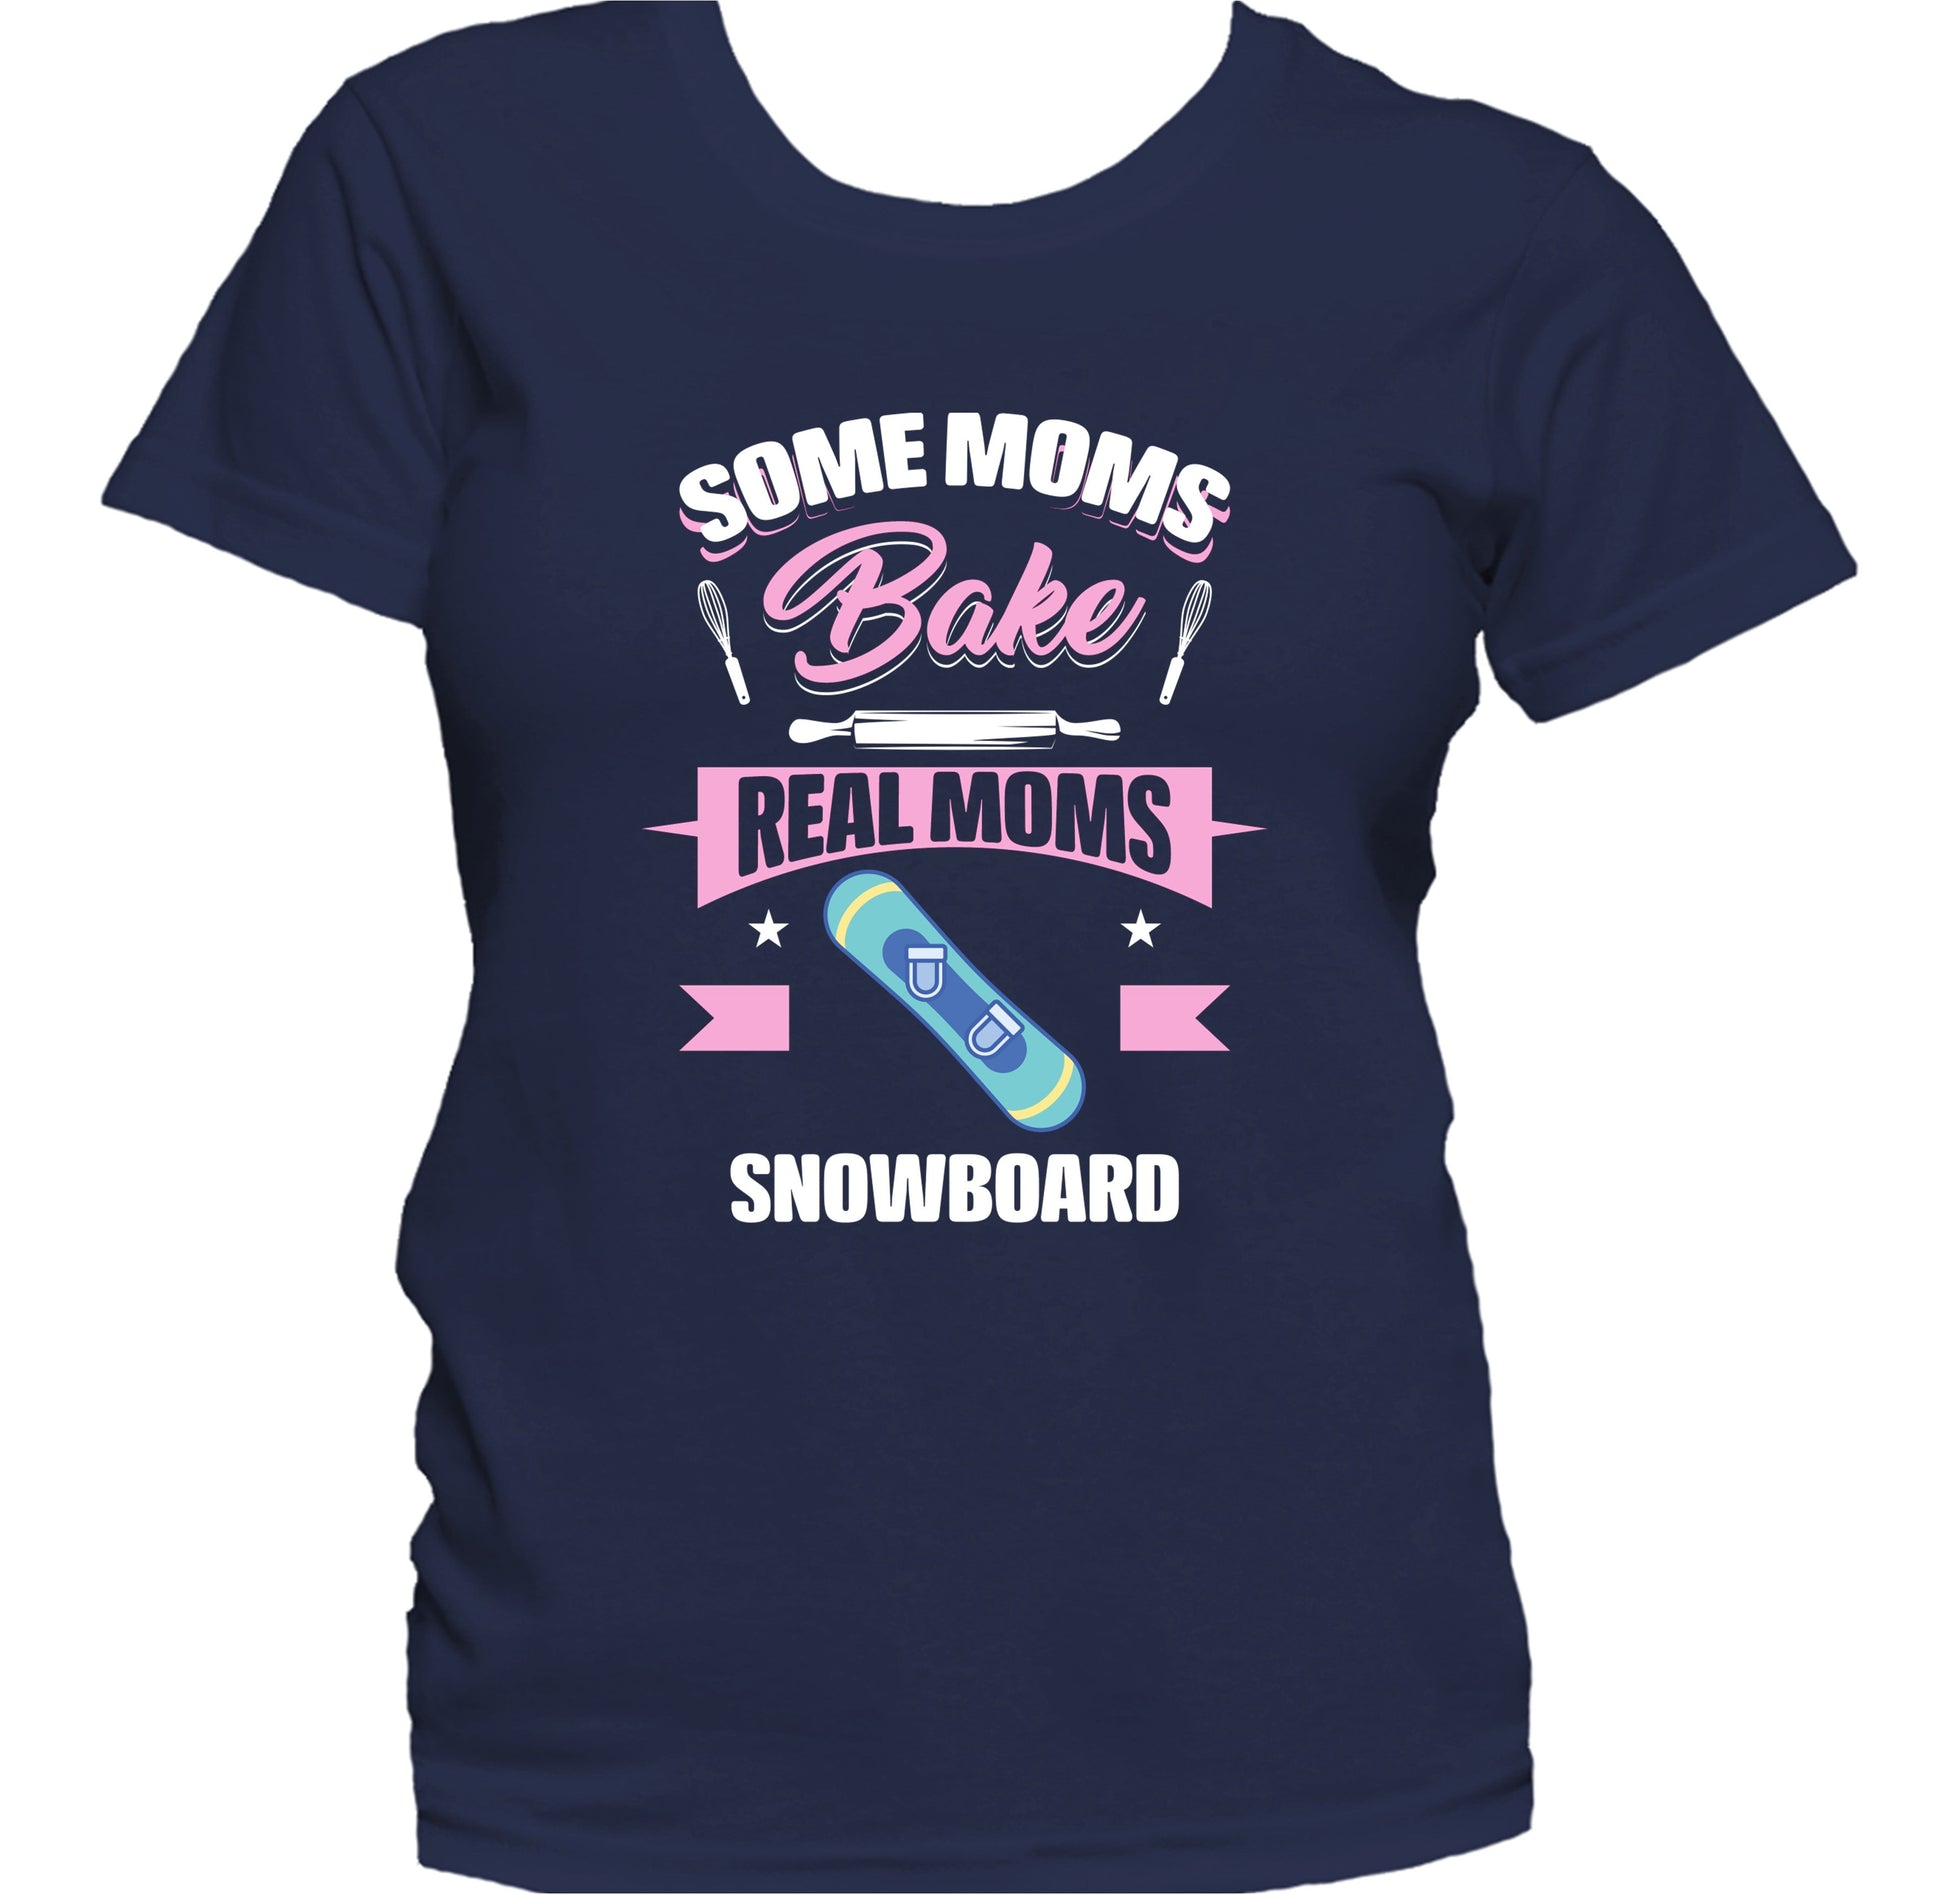 Some Moms Bake Real Moms Snowboard Funny Snowboarding Mom Women's T-Shirt